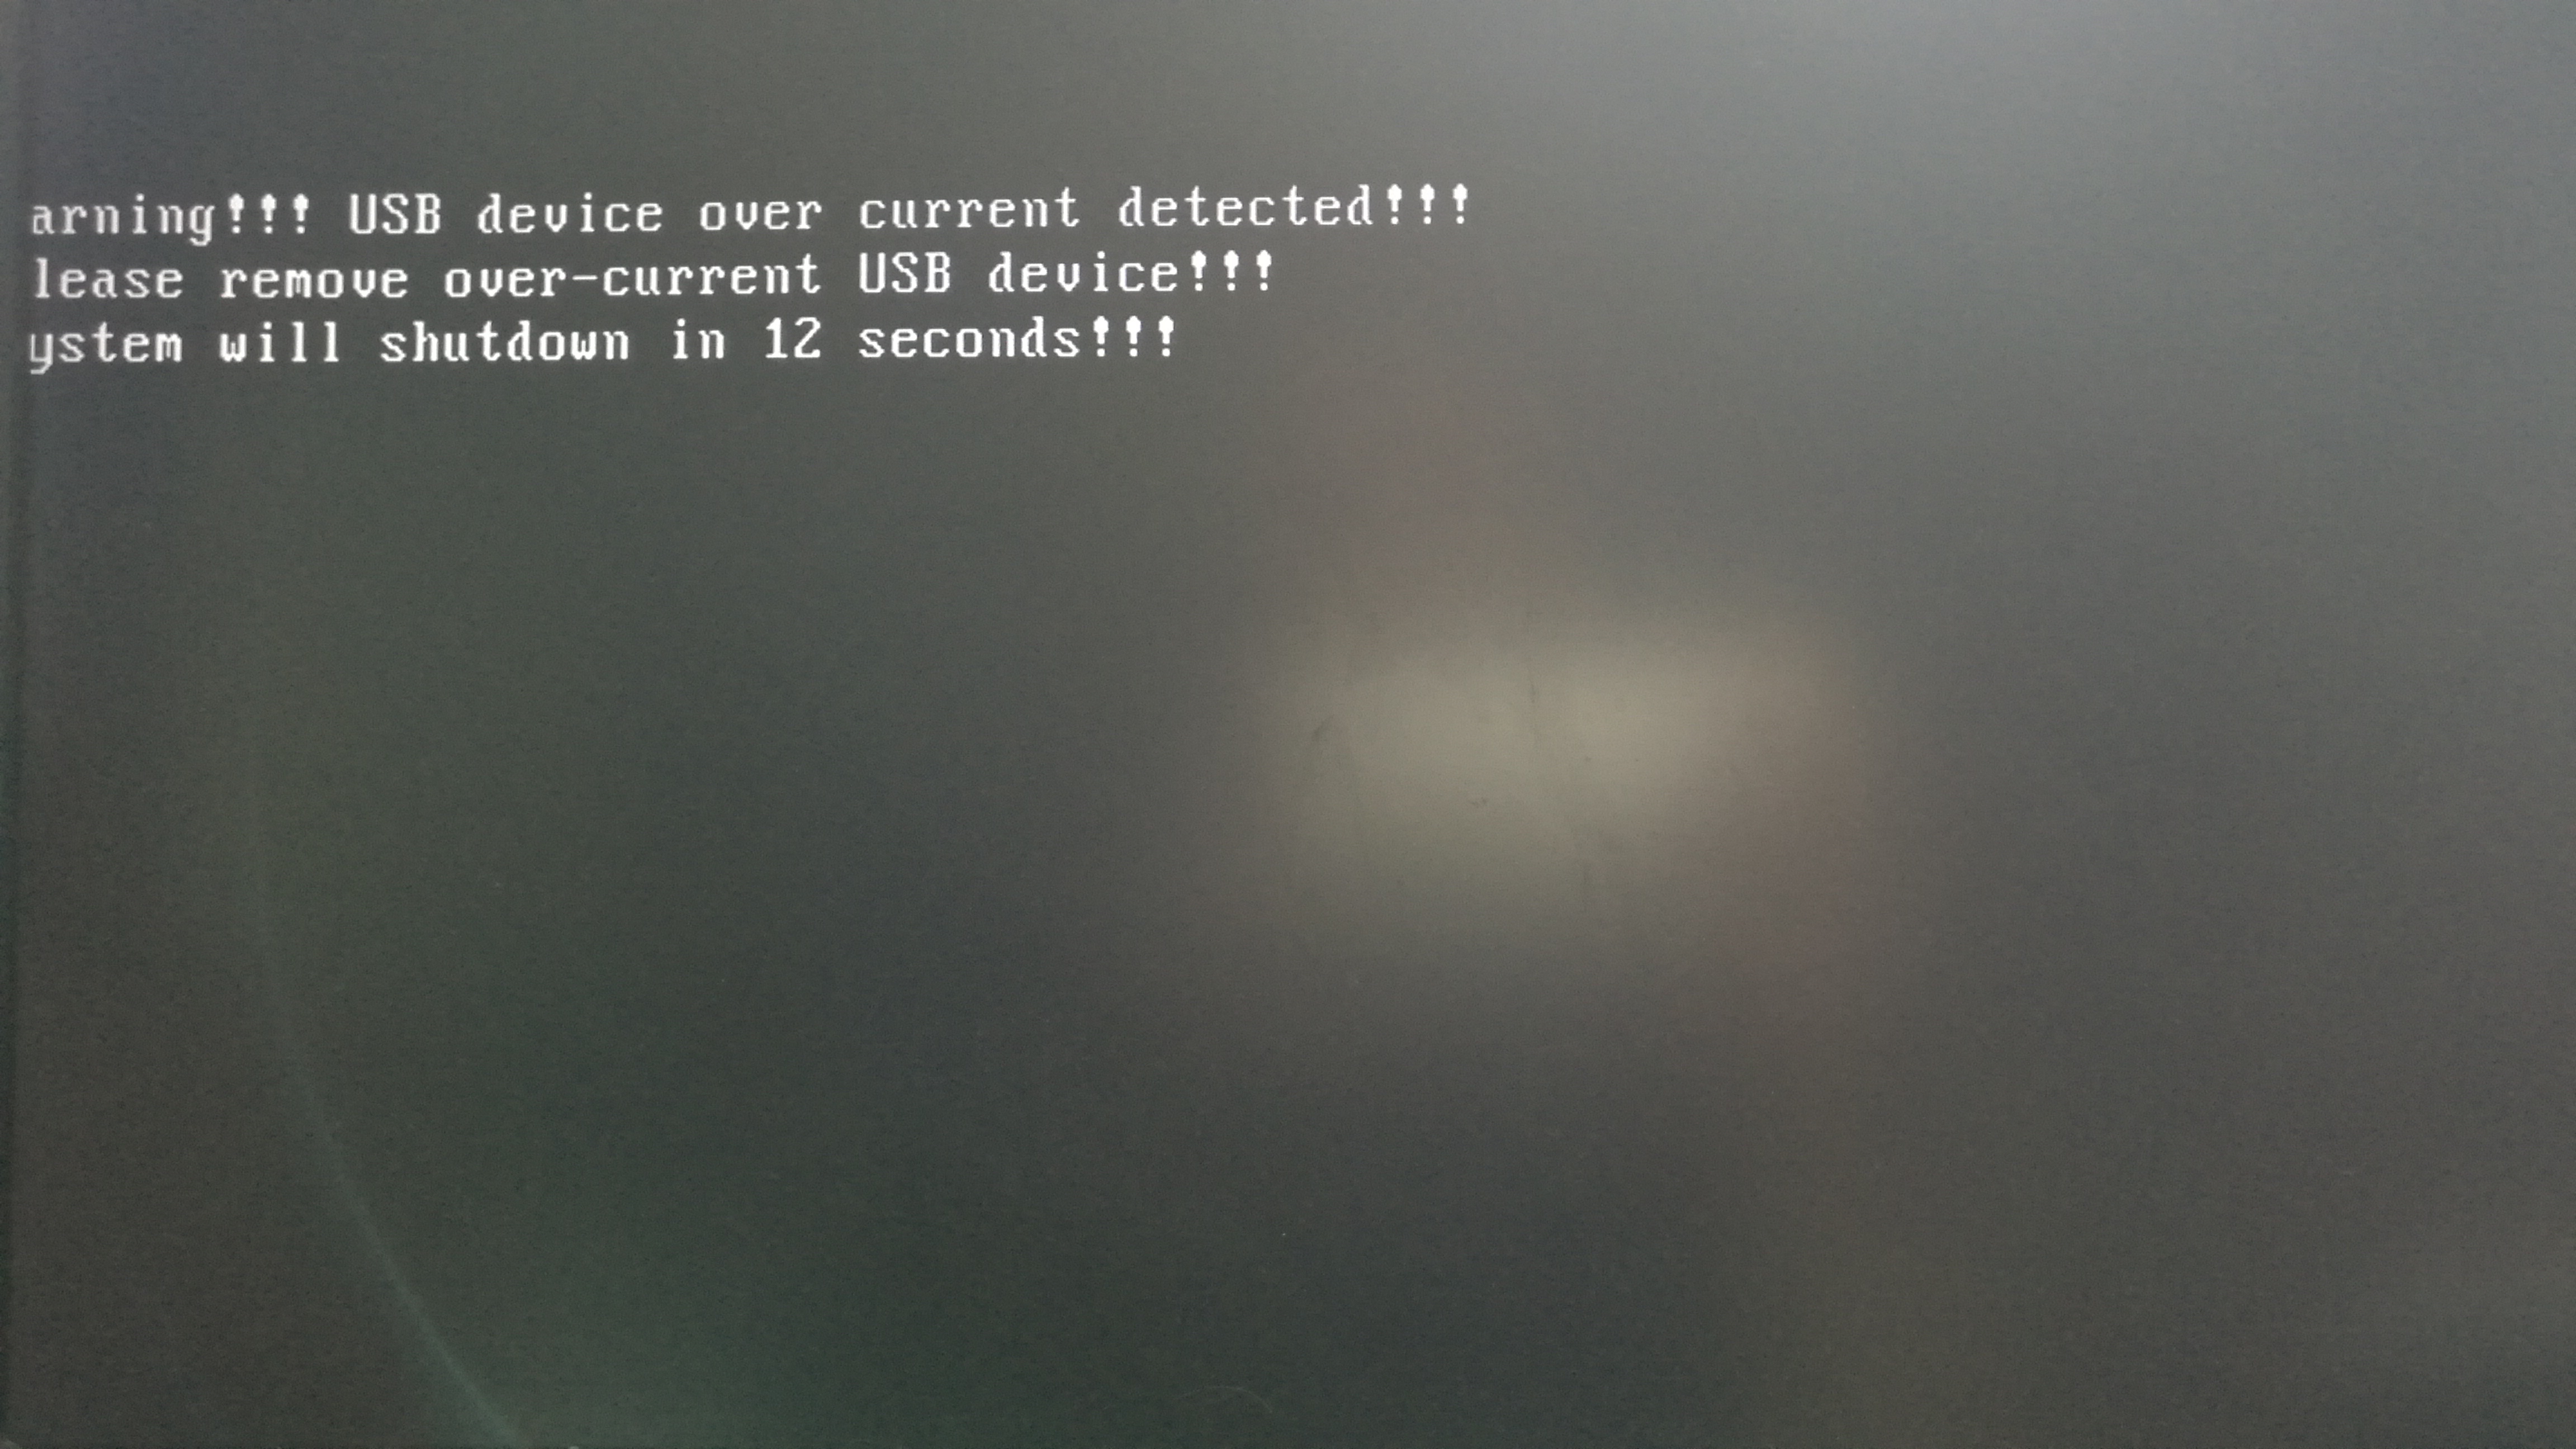 Over current status. USB device over current status detected.